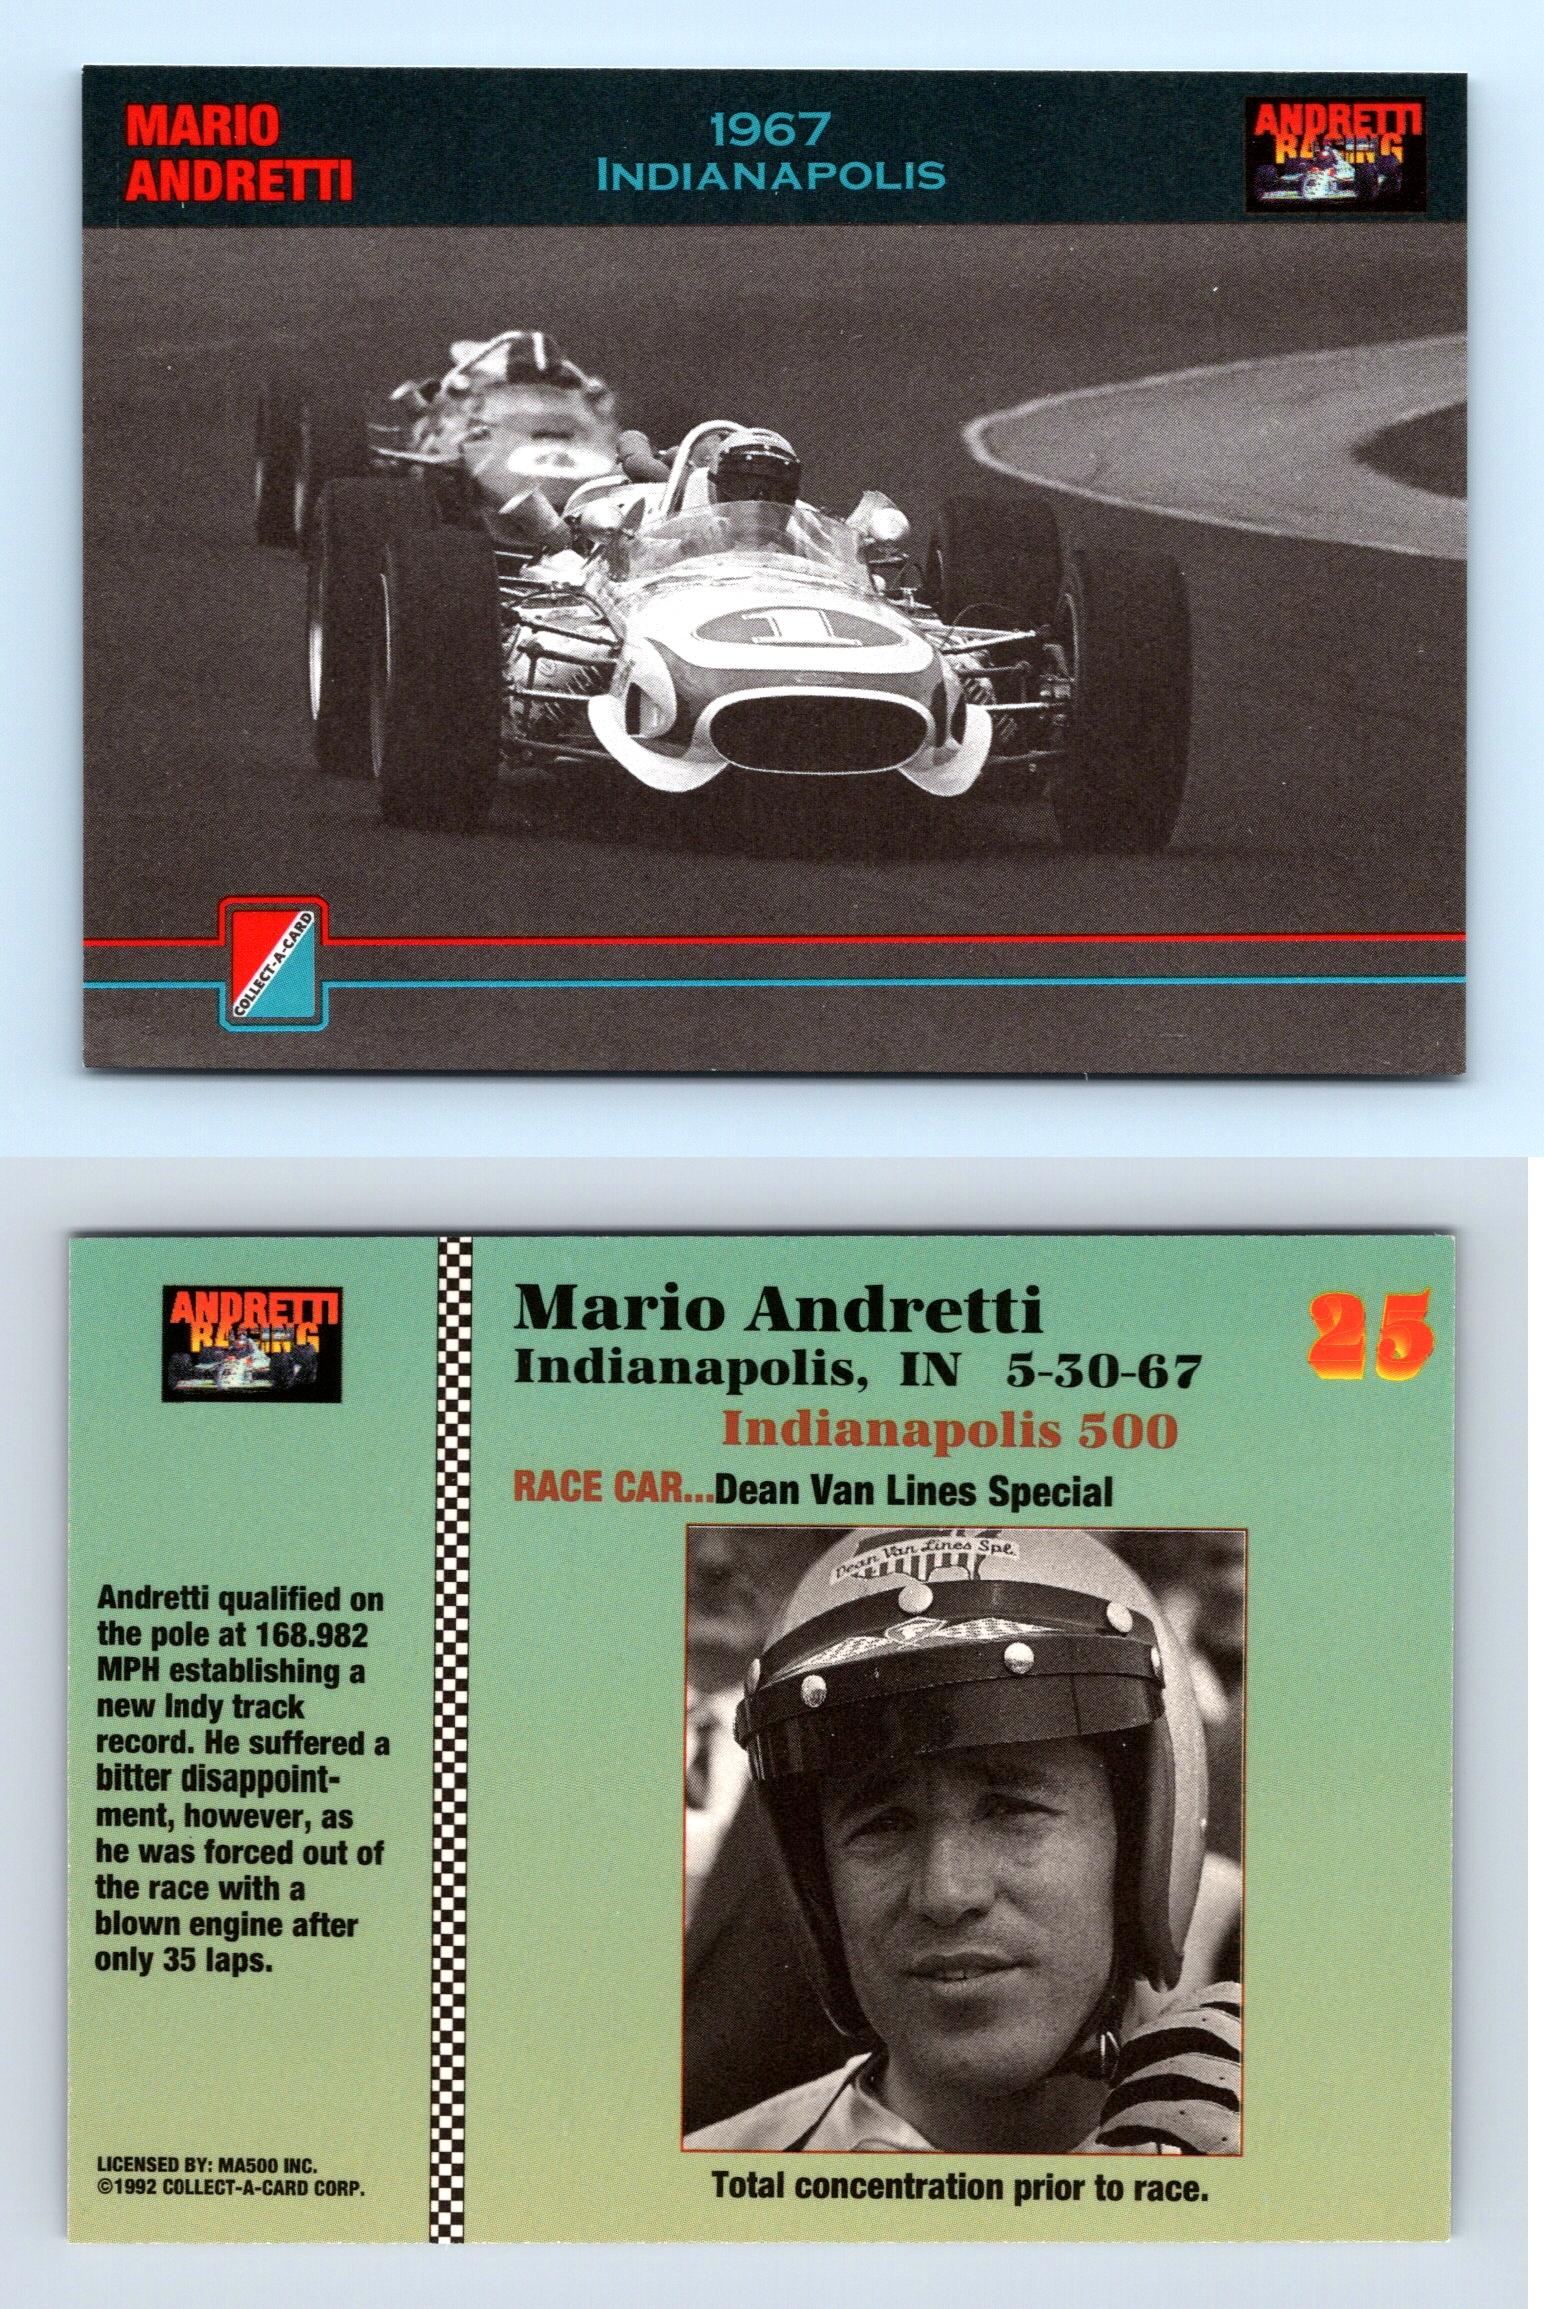 1967 Indianapolis #25 Andretti Family Racing 1992 Trading Card